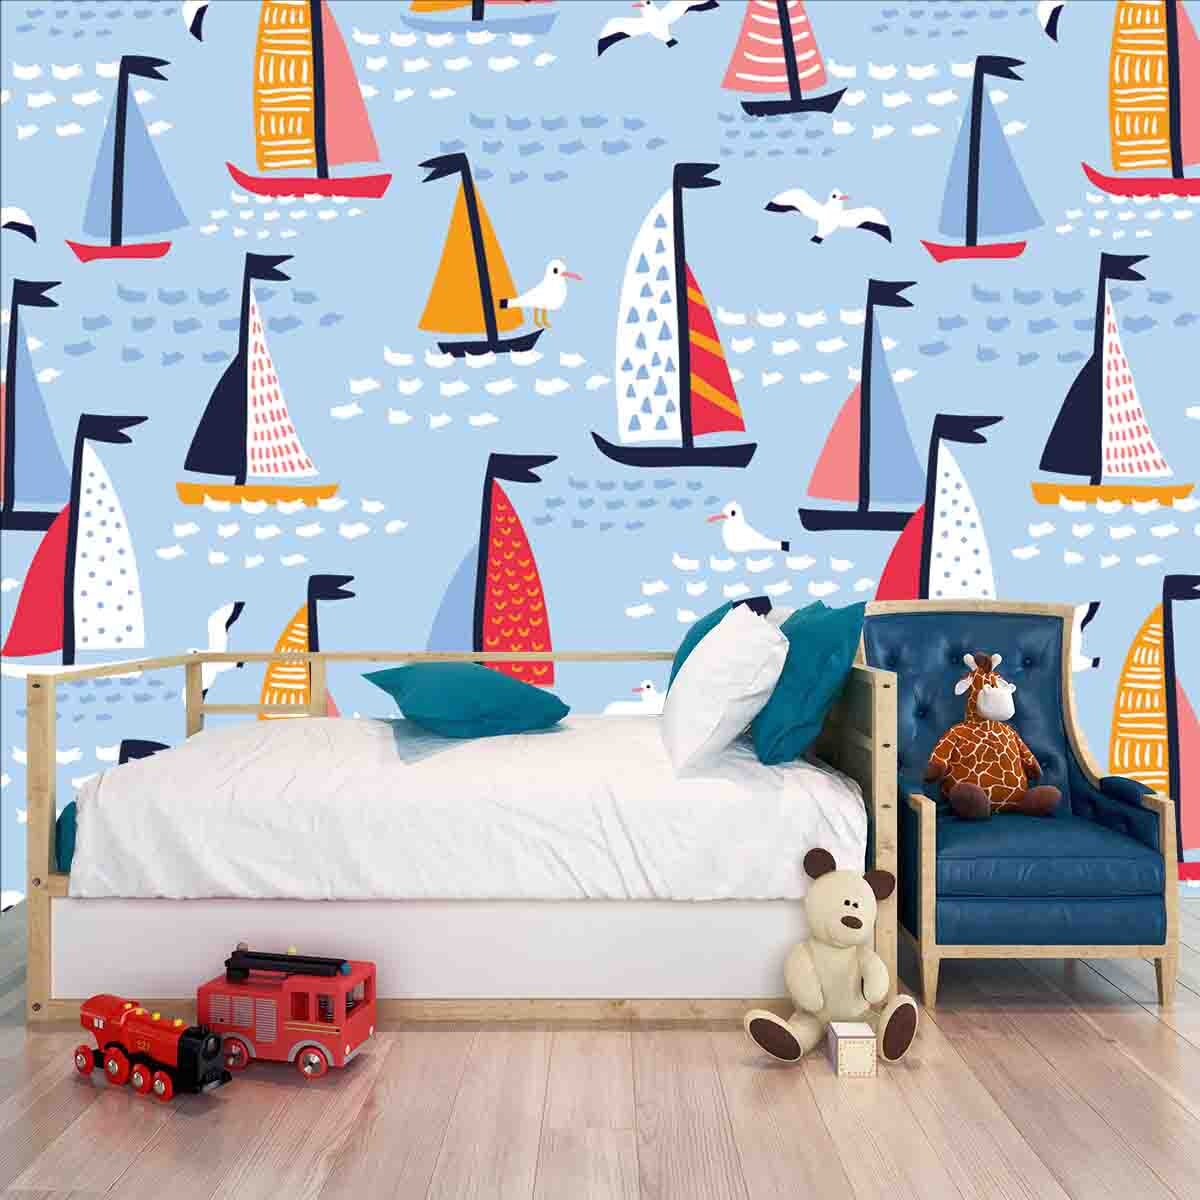 Boys Colorful Sailboat and Seagull Wallpaper Bedroom Mural